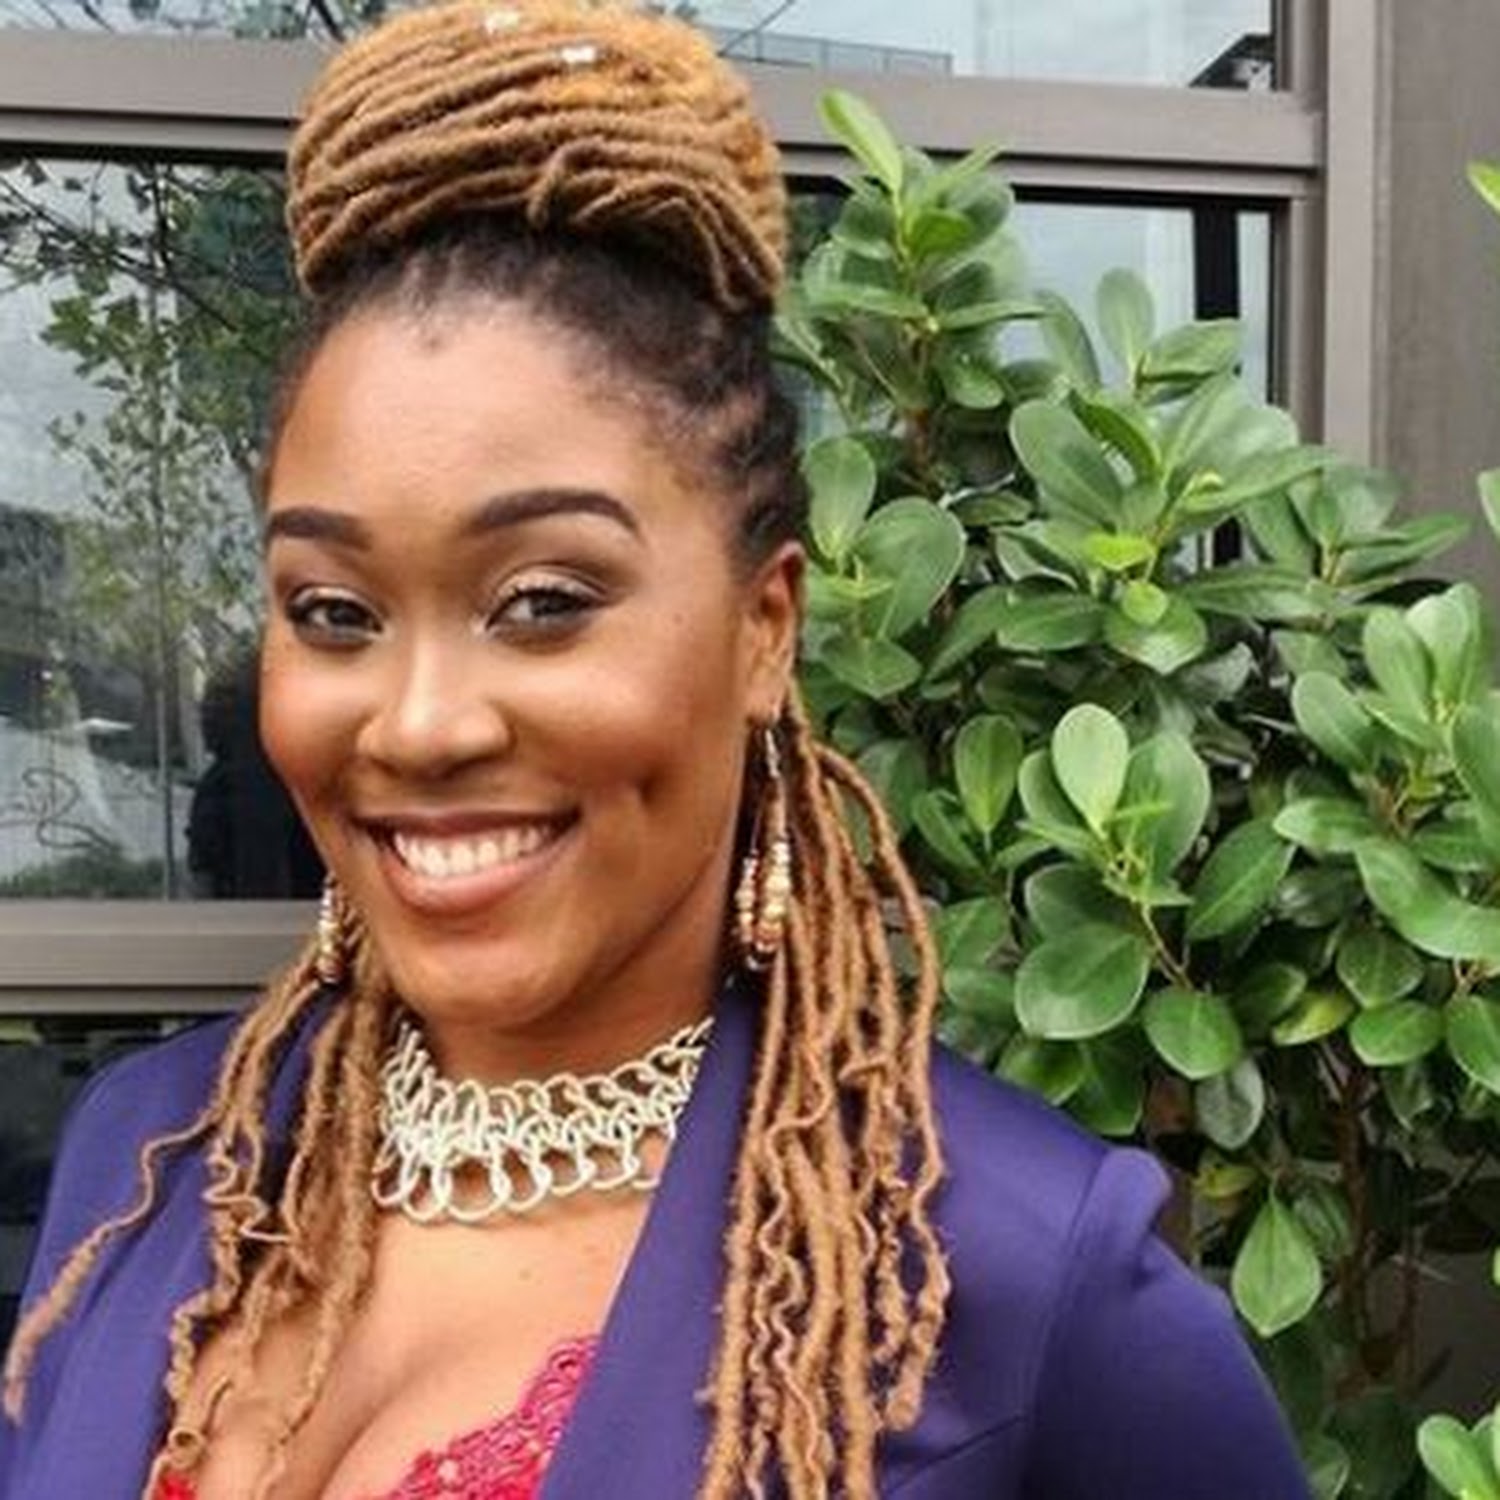 Lady Zamar Opens Up On Why Her 4th Album Is Not Ready